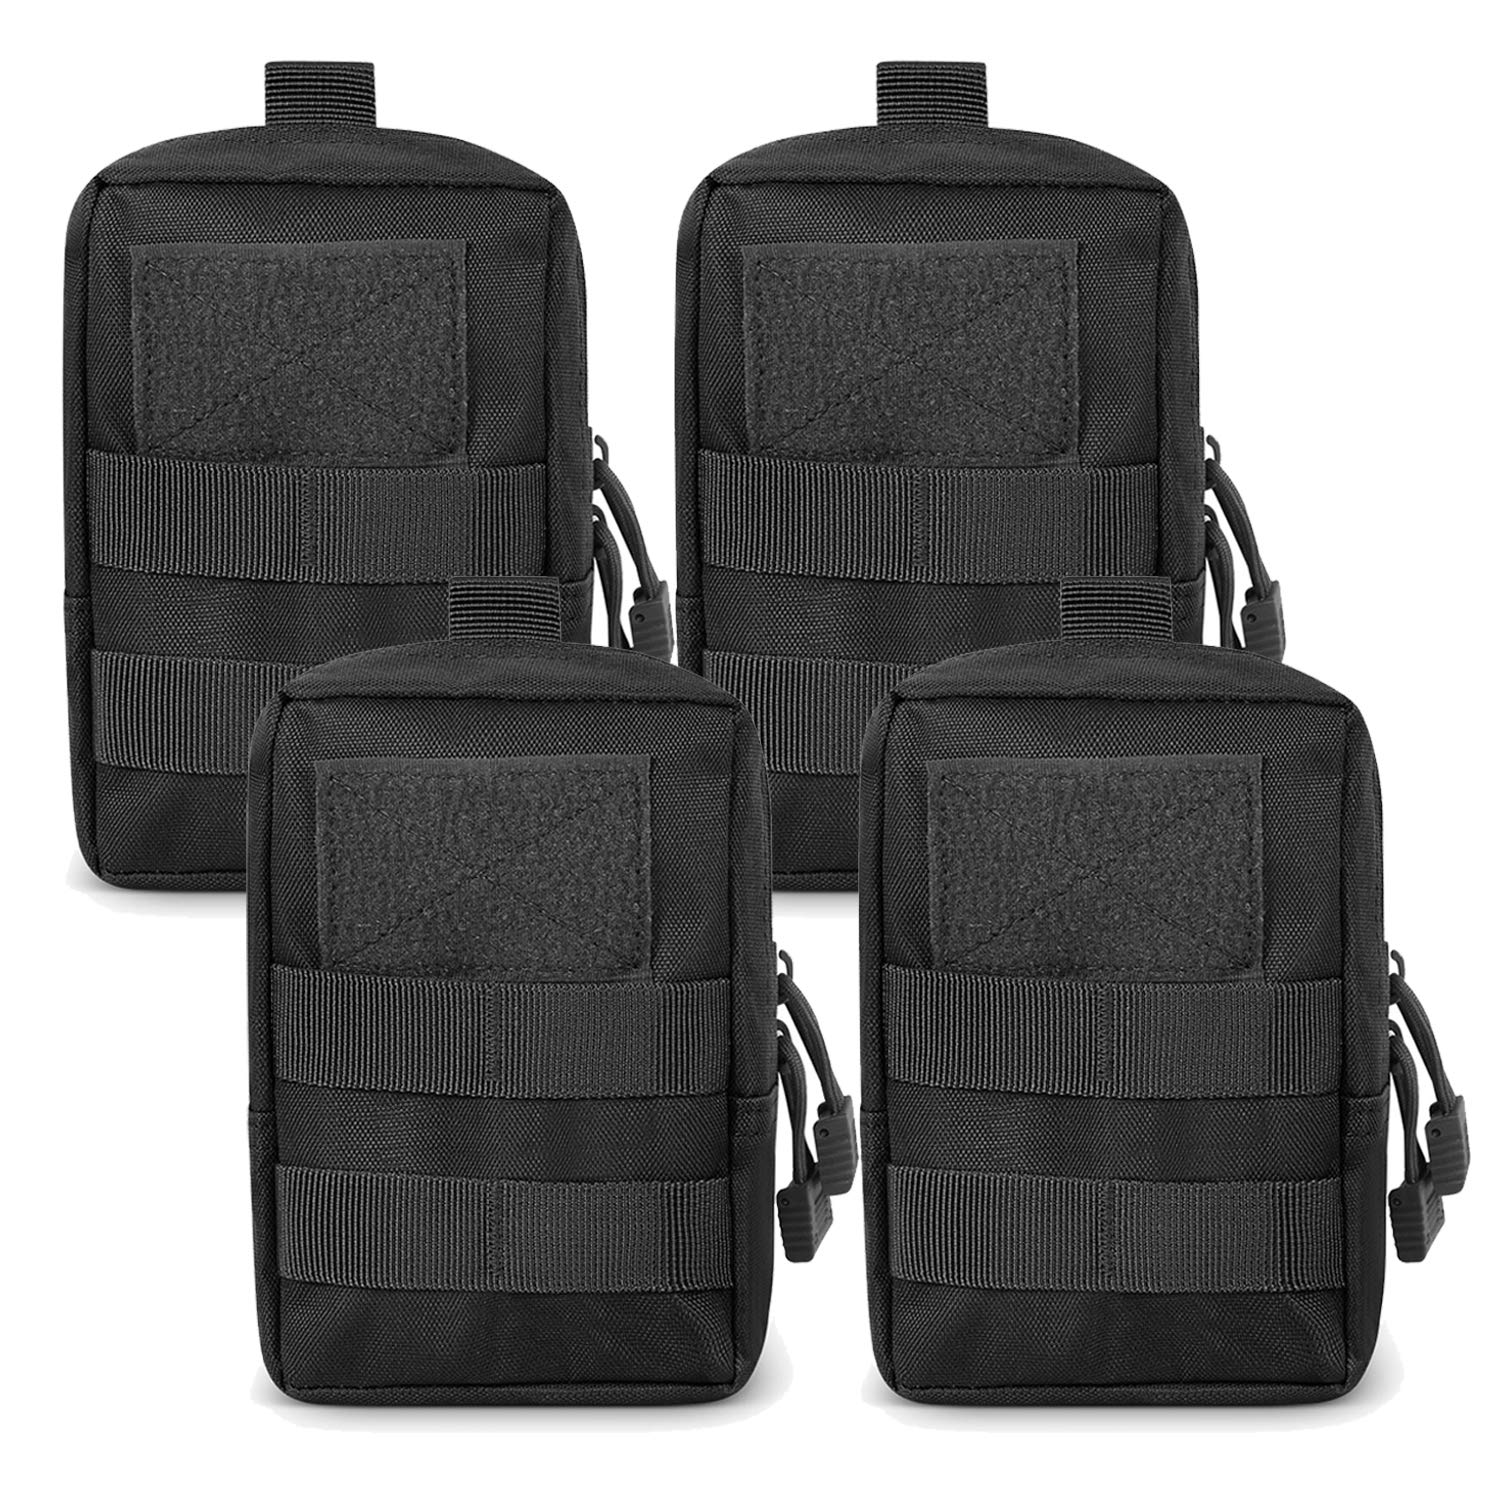 Gogoku 4-Pack Molle Pouch Tactical Molle Pouches Compact Utility EDC Waist  Bag Pack Combo A:Black